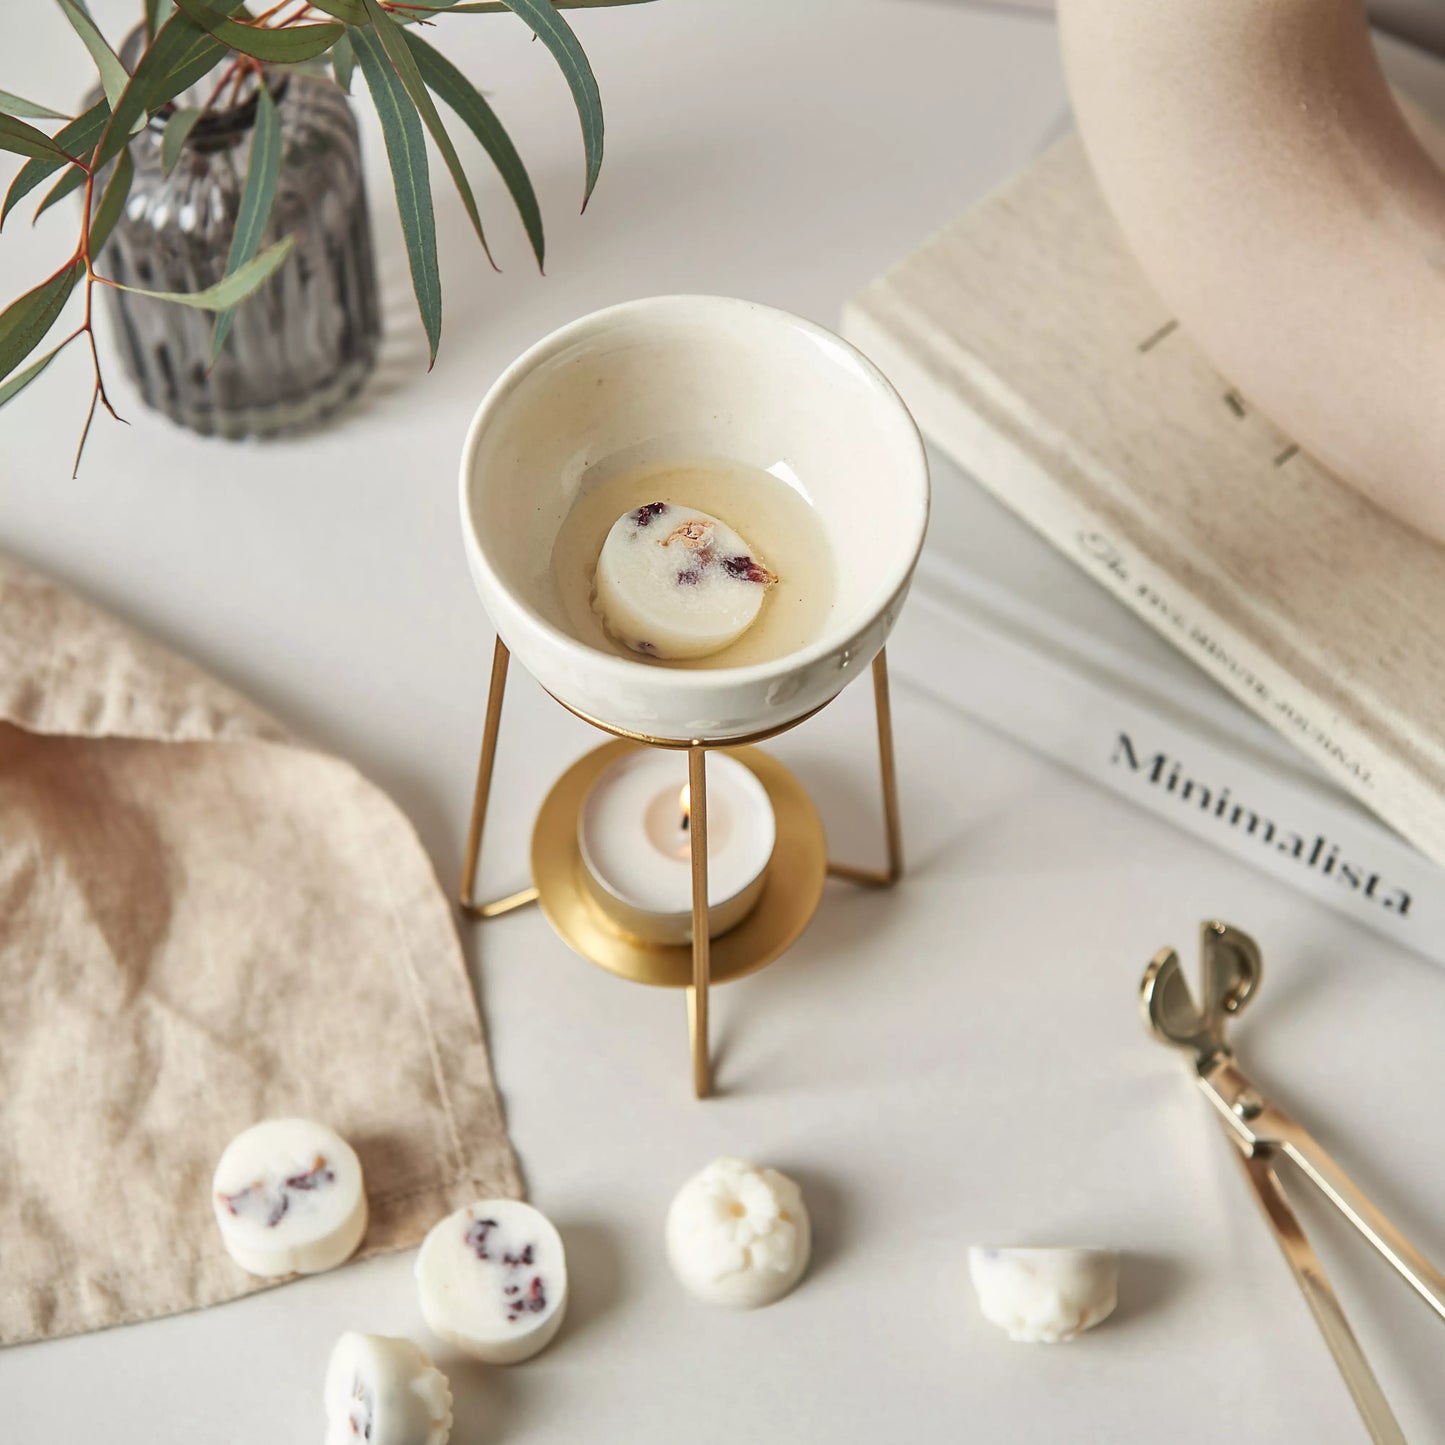 Our Lodge Wax Melts slowly melt in our bronze wax warmer, heated by a tea light beneath it.